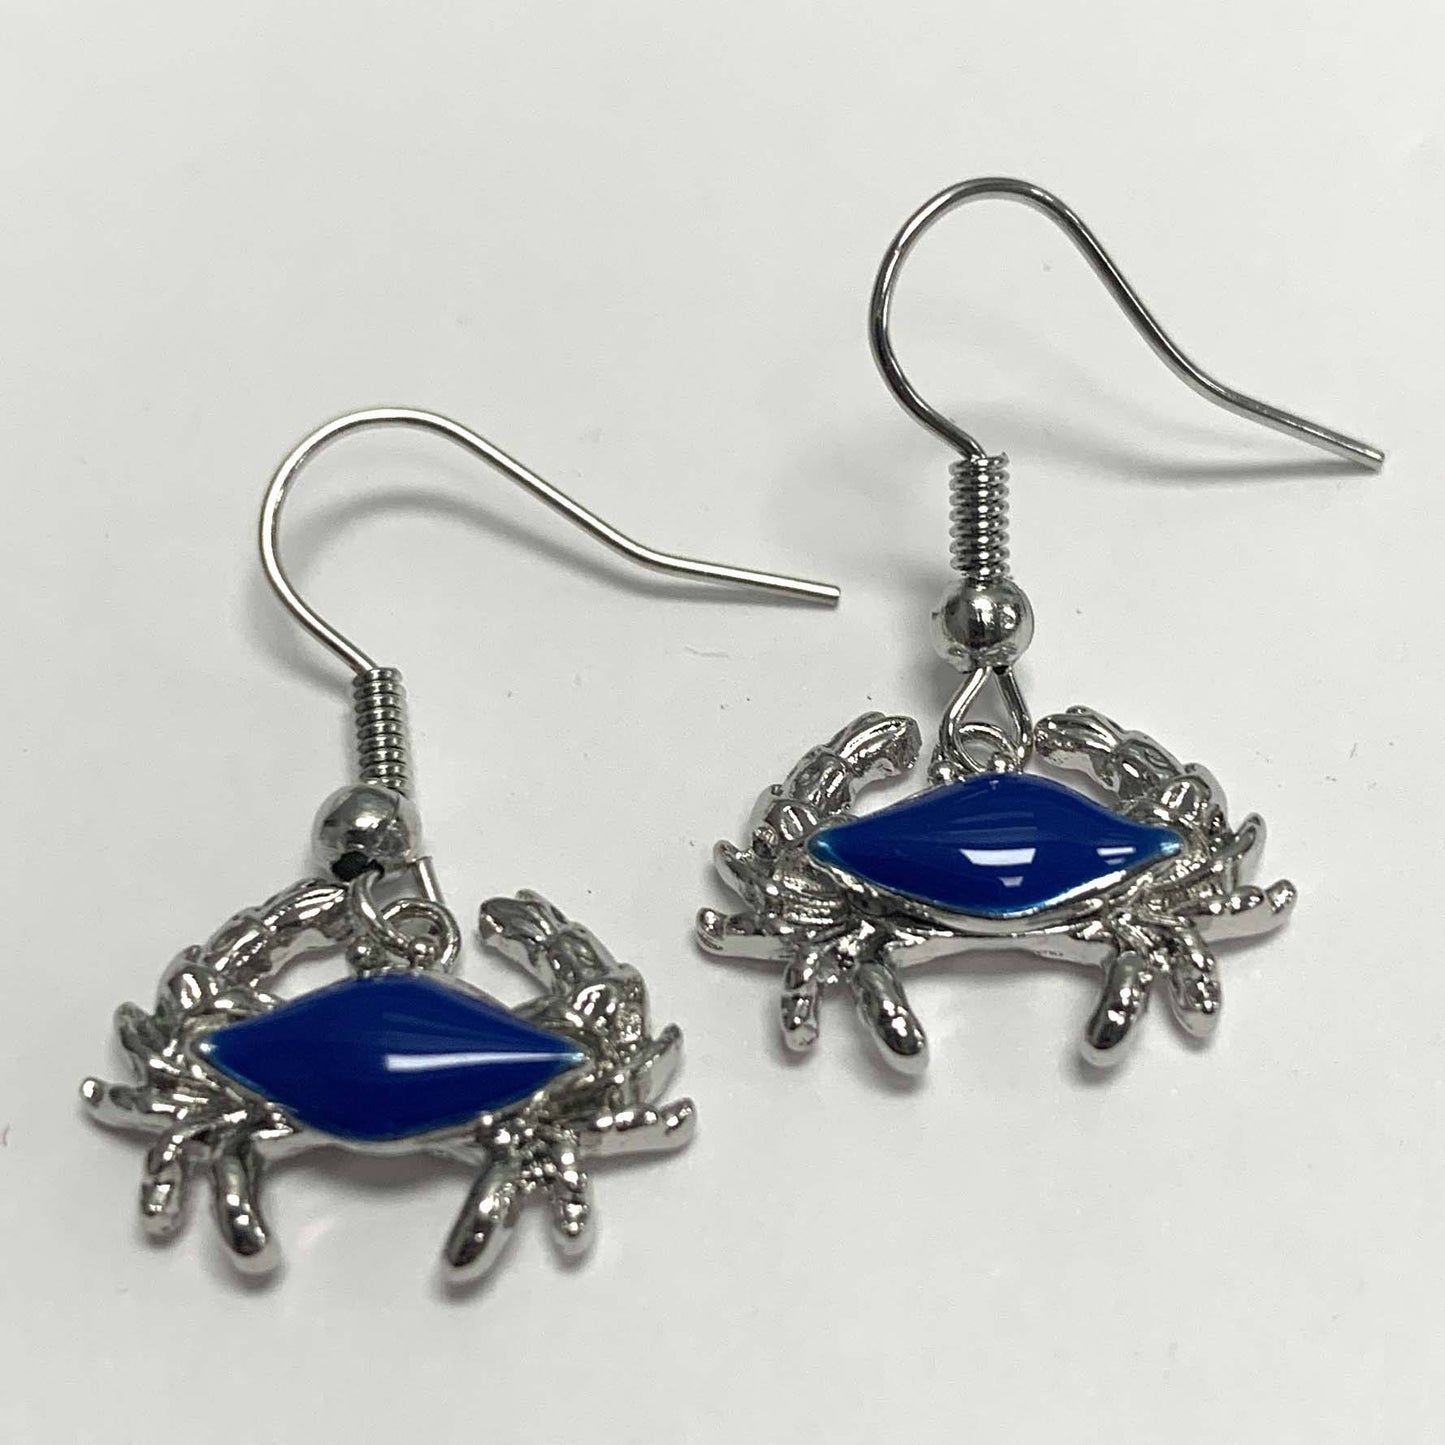 Crab / Dangle Earrings - Route One Apparel